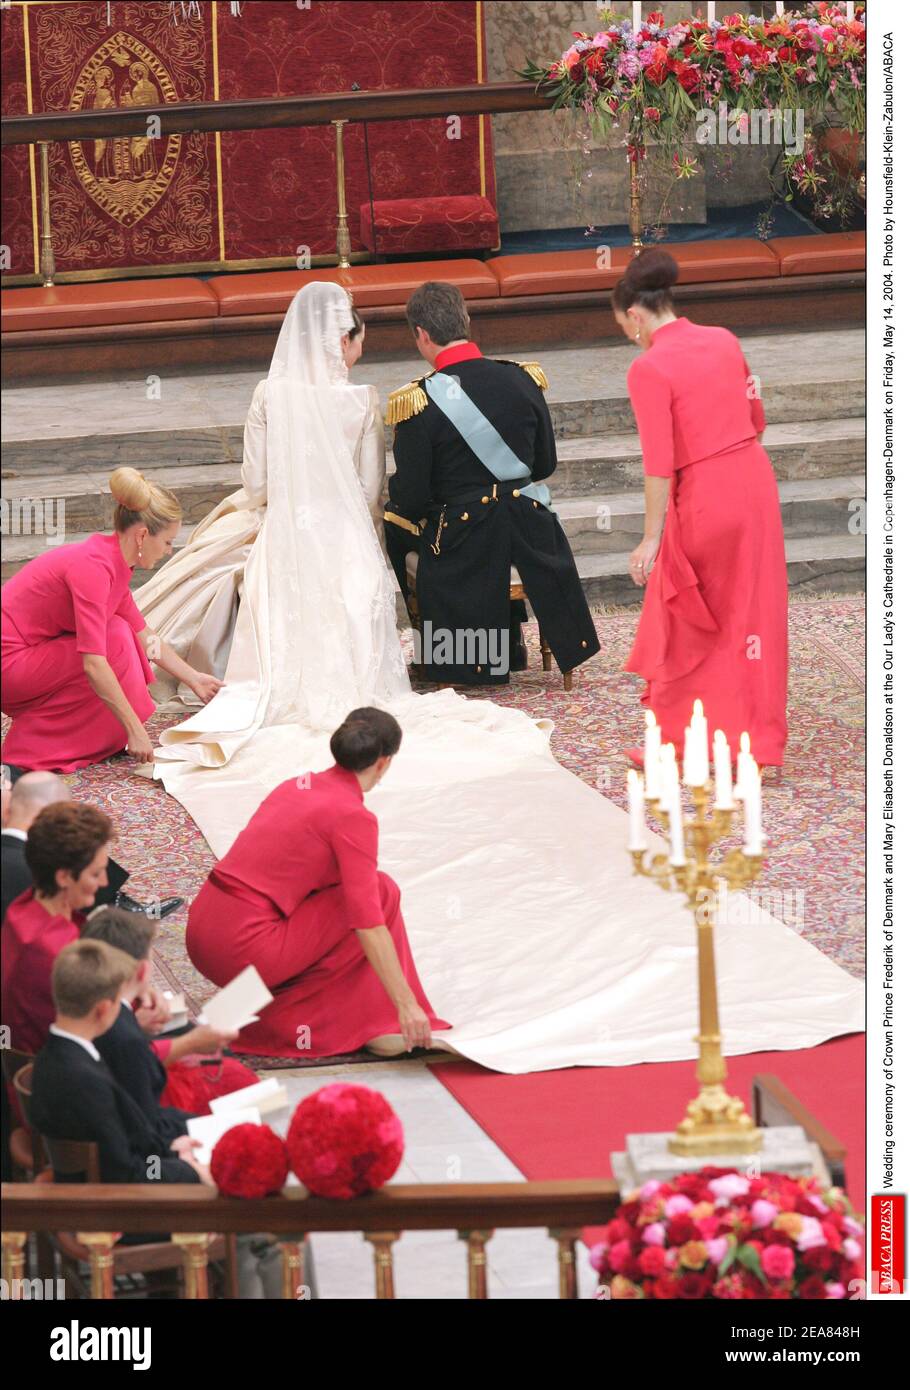 Wedding ceremony of Crown Prince Frederik of Denmark and Mary Elisabeth Donaldson at the Our Lady's Cathedrale in Copenhagen-Denmark on Friday, May 14, 2004. Photo by Hounsfield-Klein-Zabulon/ABACA Stock Photo